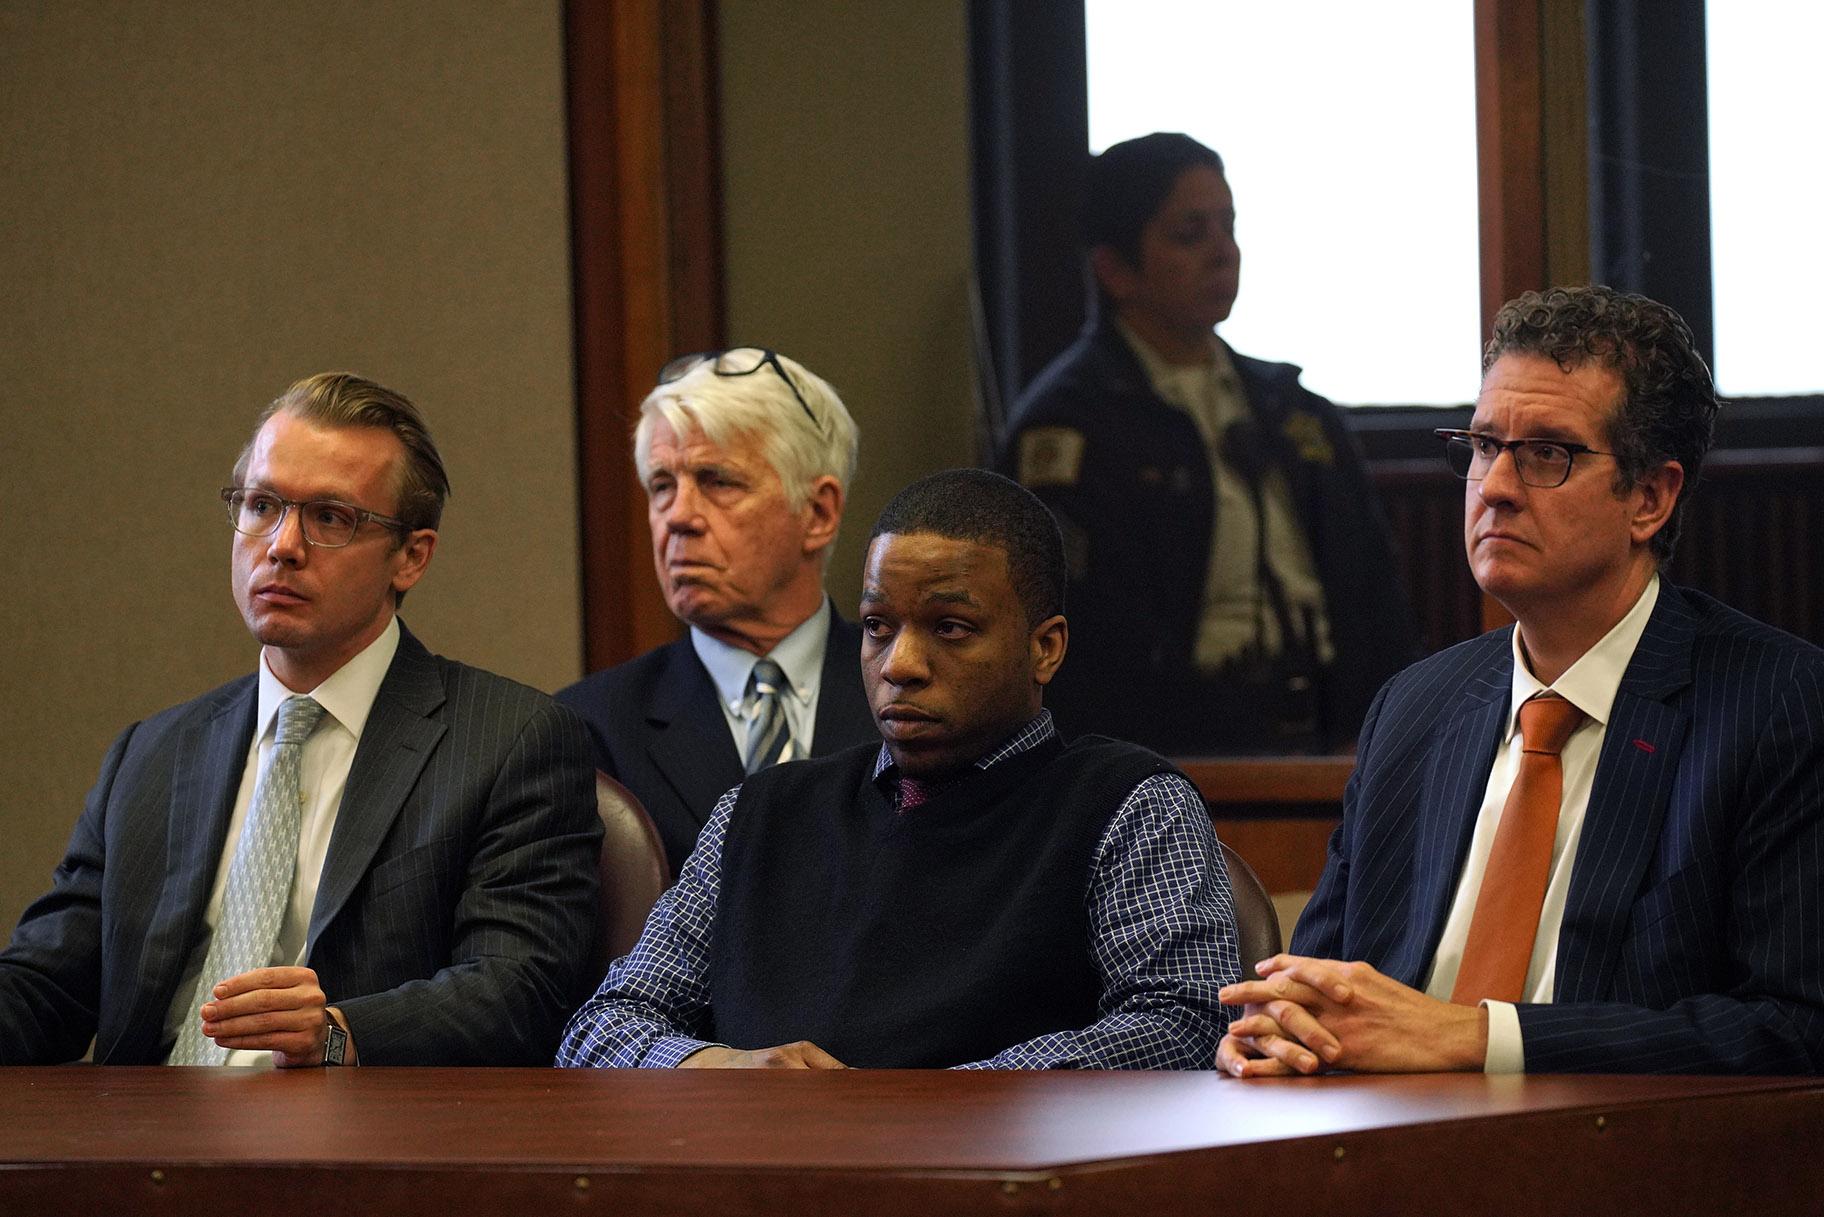 Corey Morgan is found guilty of first-degree murder for the killing of 9-year-old Tyshawn Lee during his trial at the Leighton Criminal Court Building in Chicago on Friday, Oct. 4, 2019. (E. Jason Wambsgans / Chicago Tribune / pool)